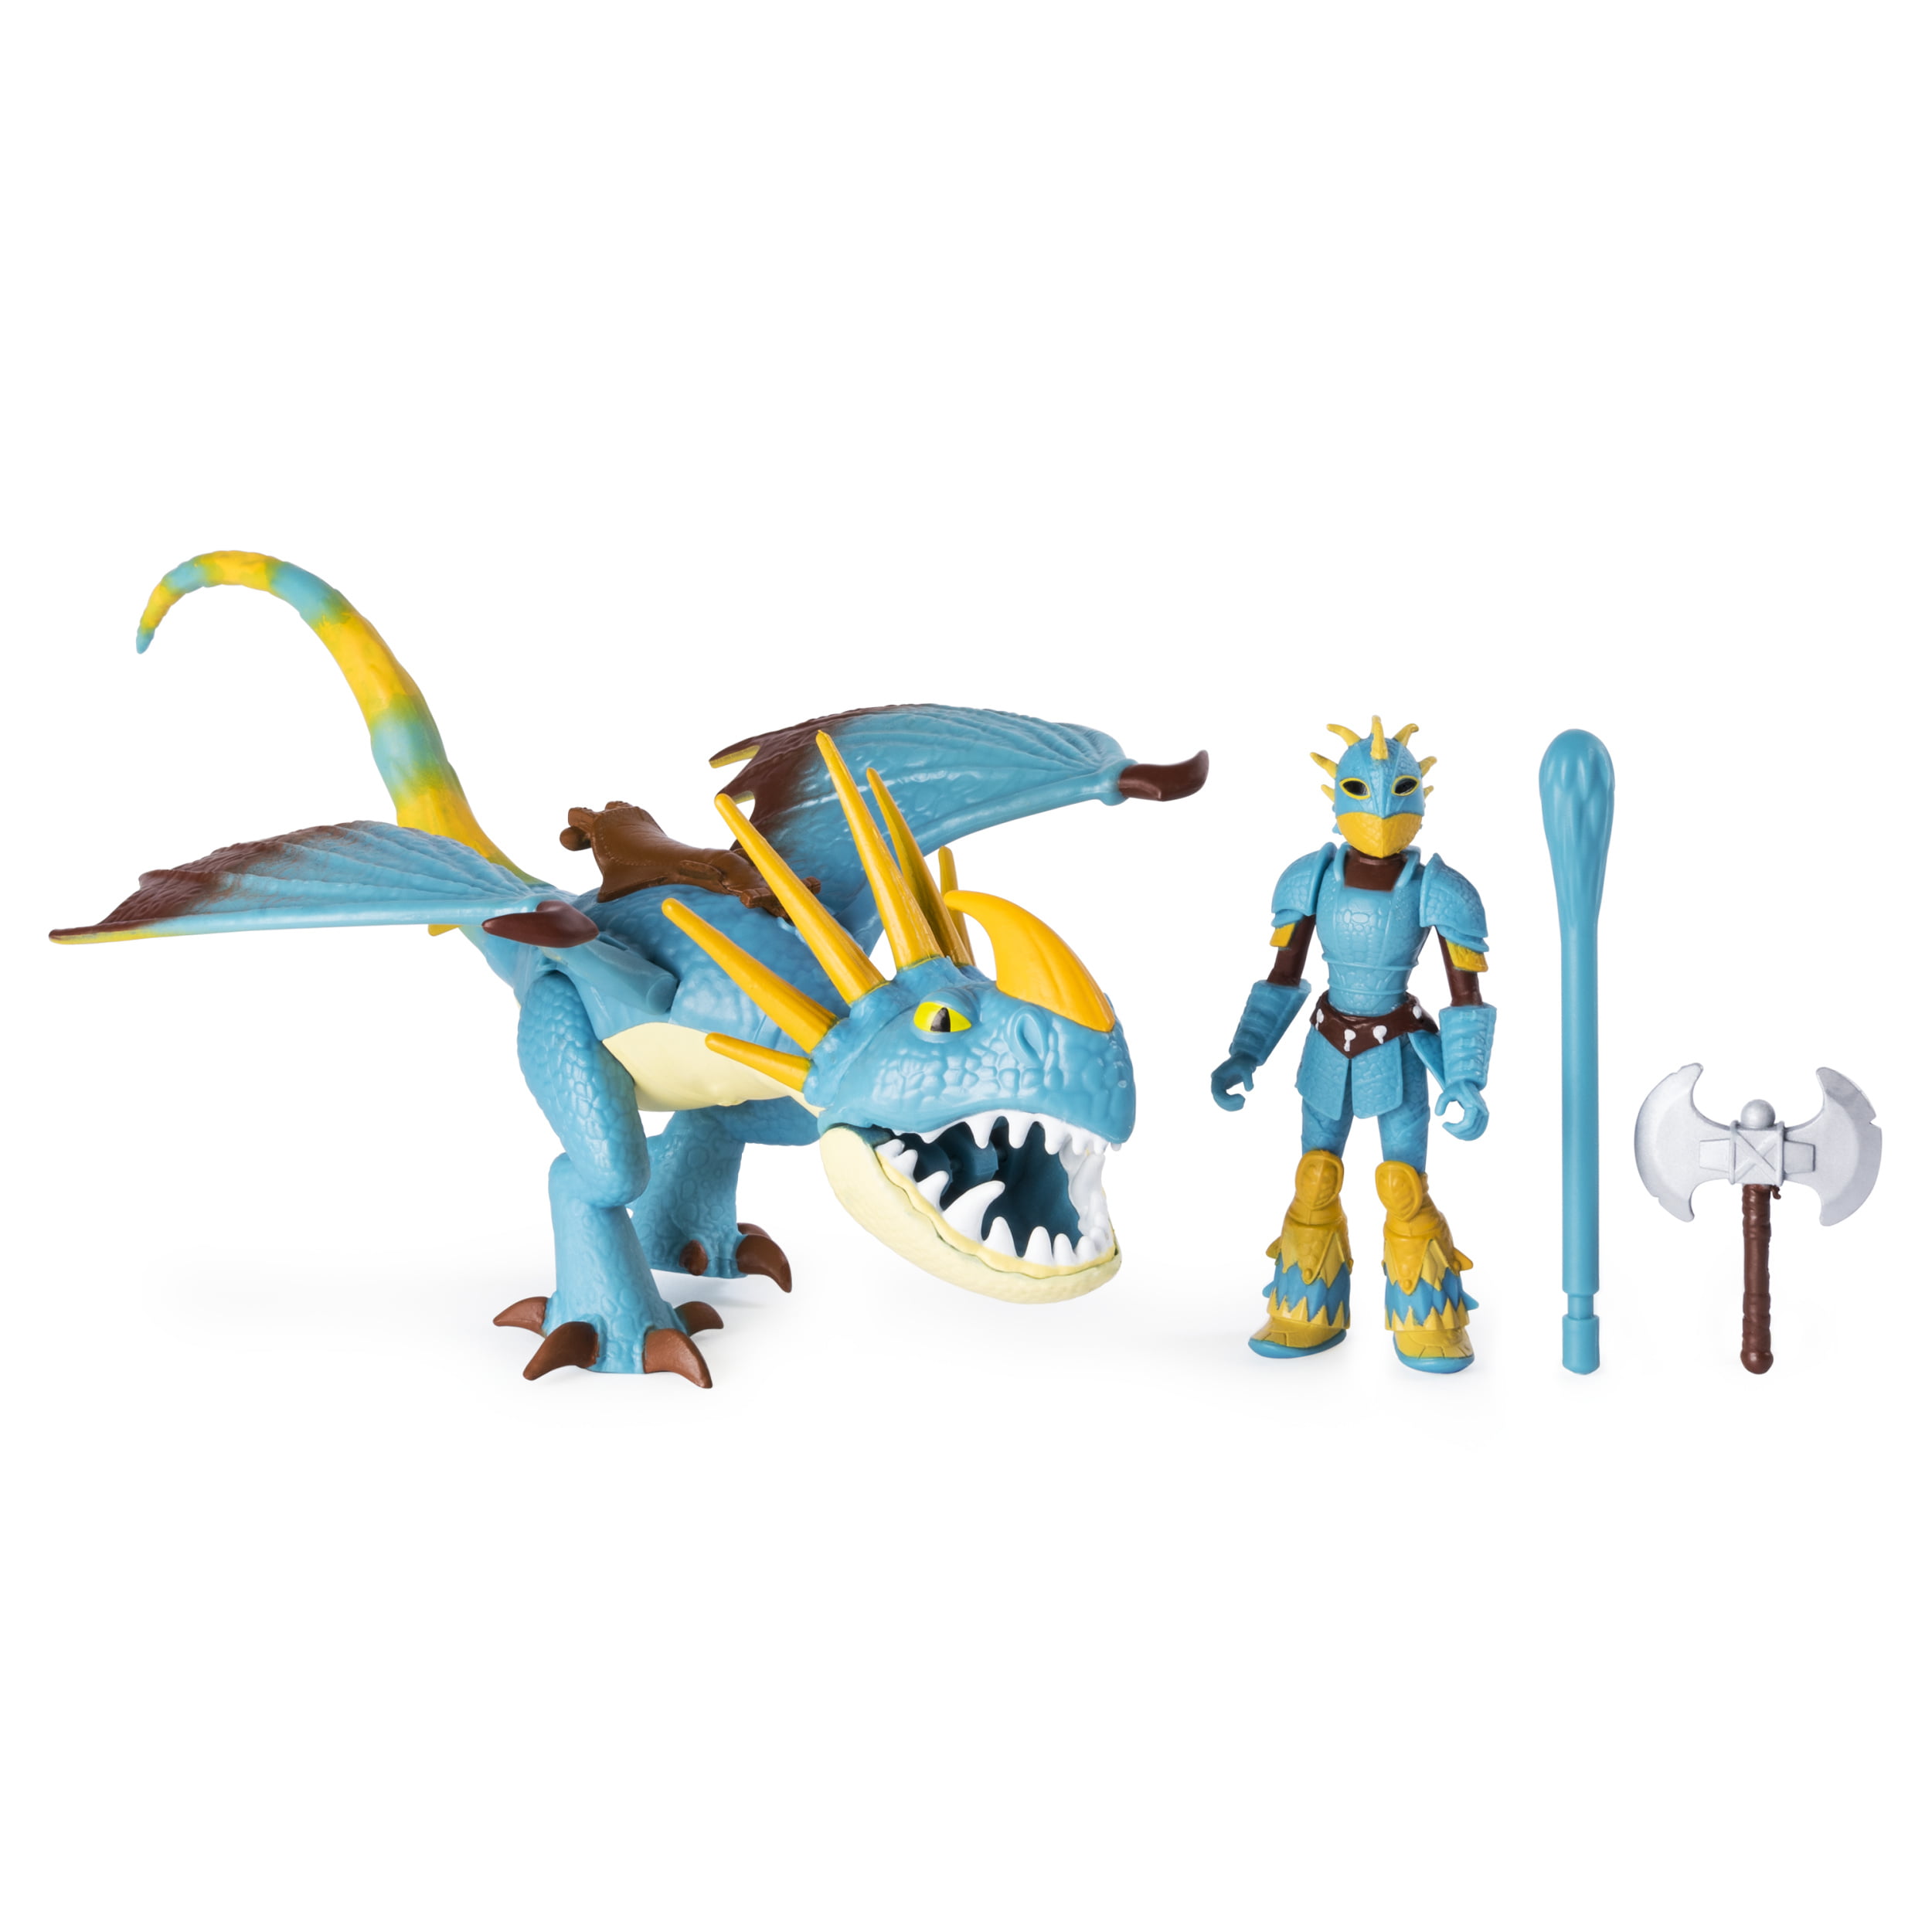 Stormfly Dragon Figure with Moving Parts DreamWorks Dragons for Kids Aged 4 and Up